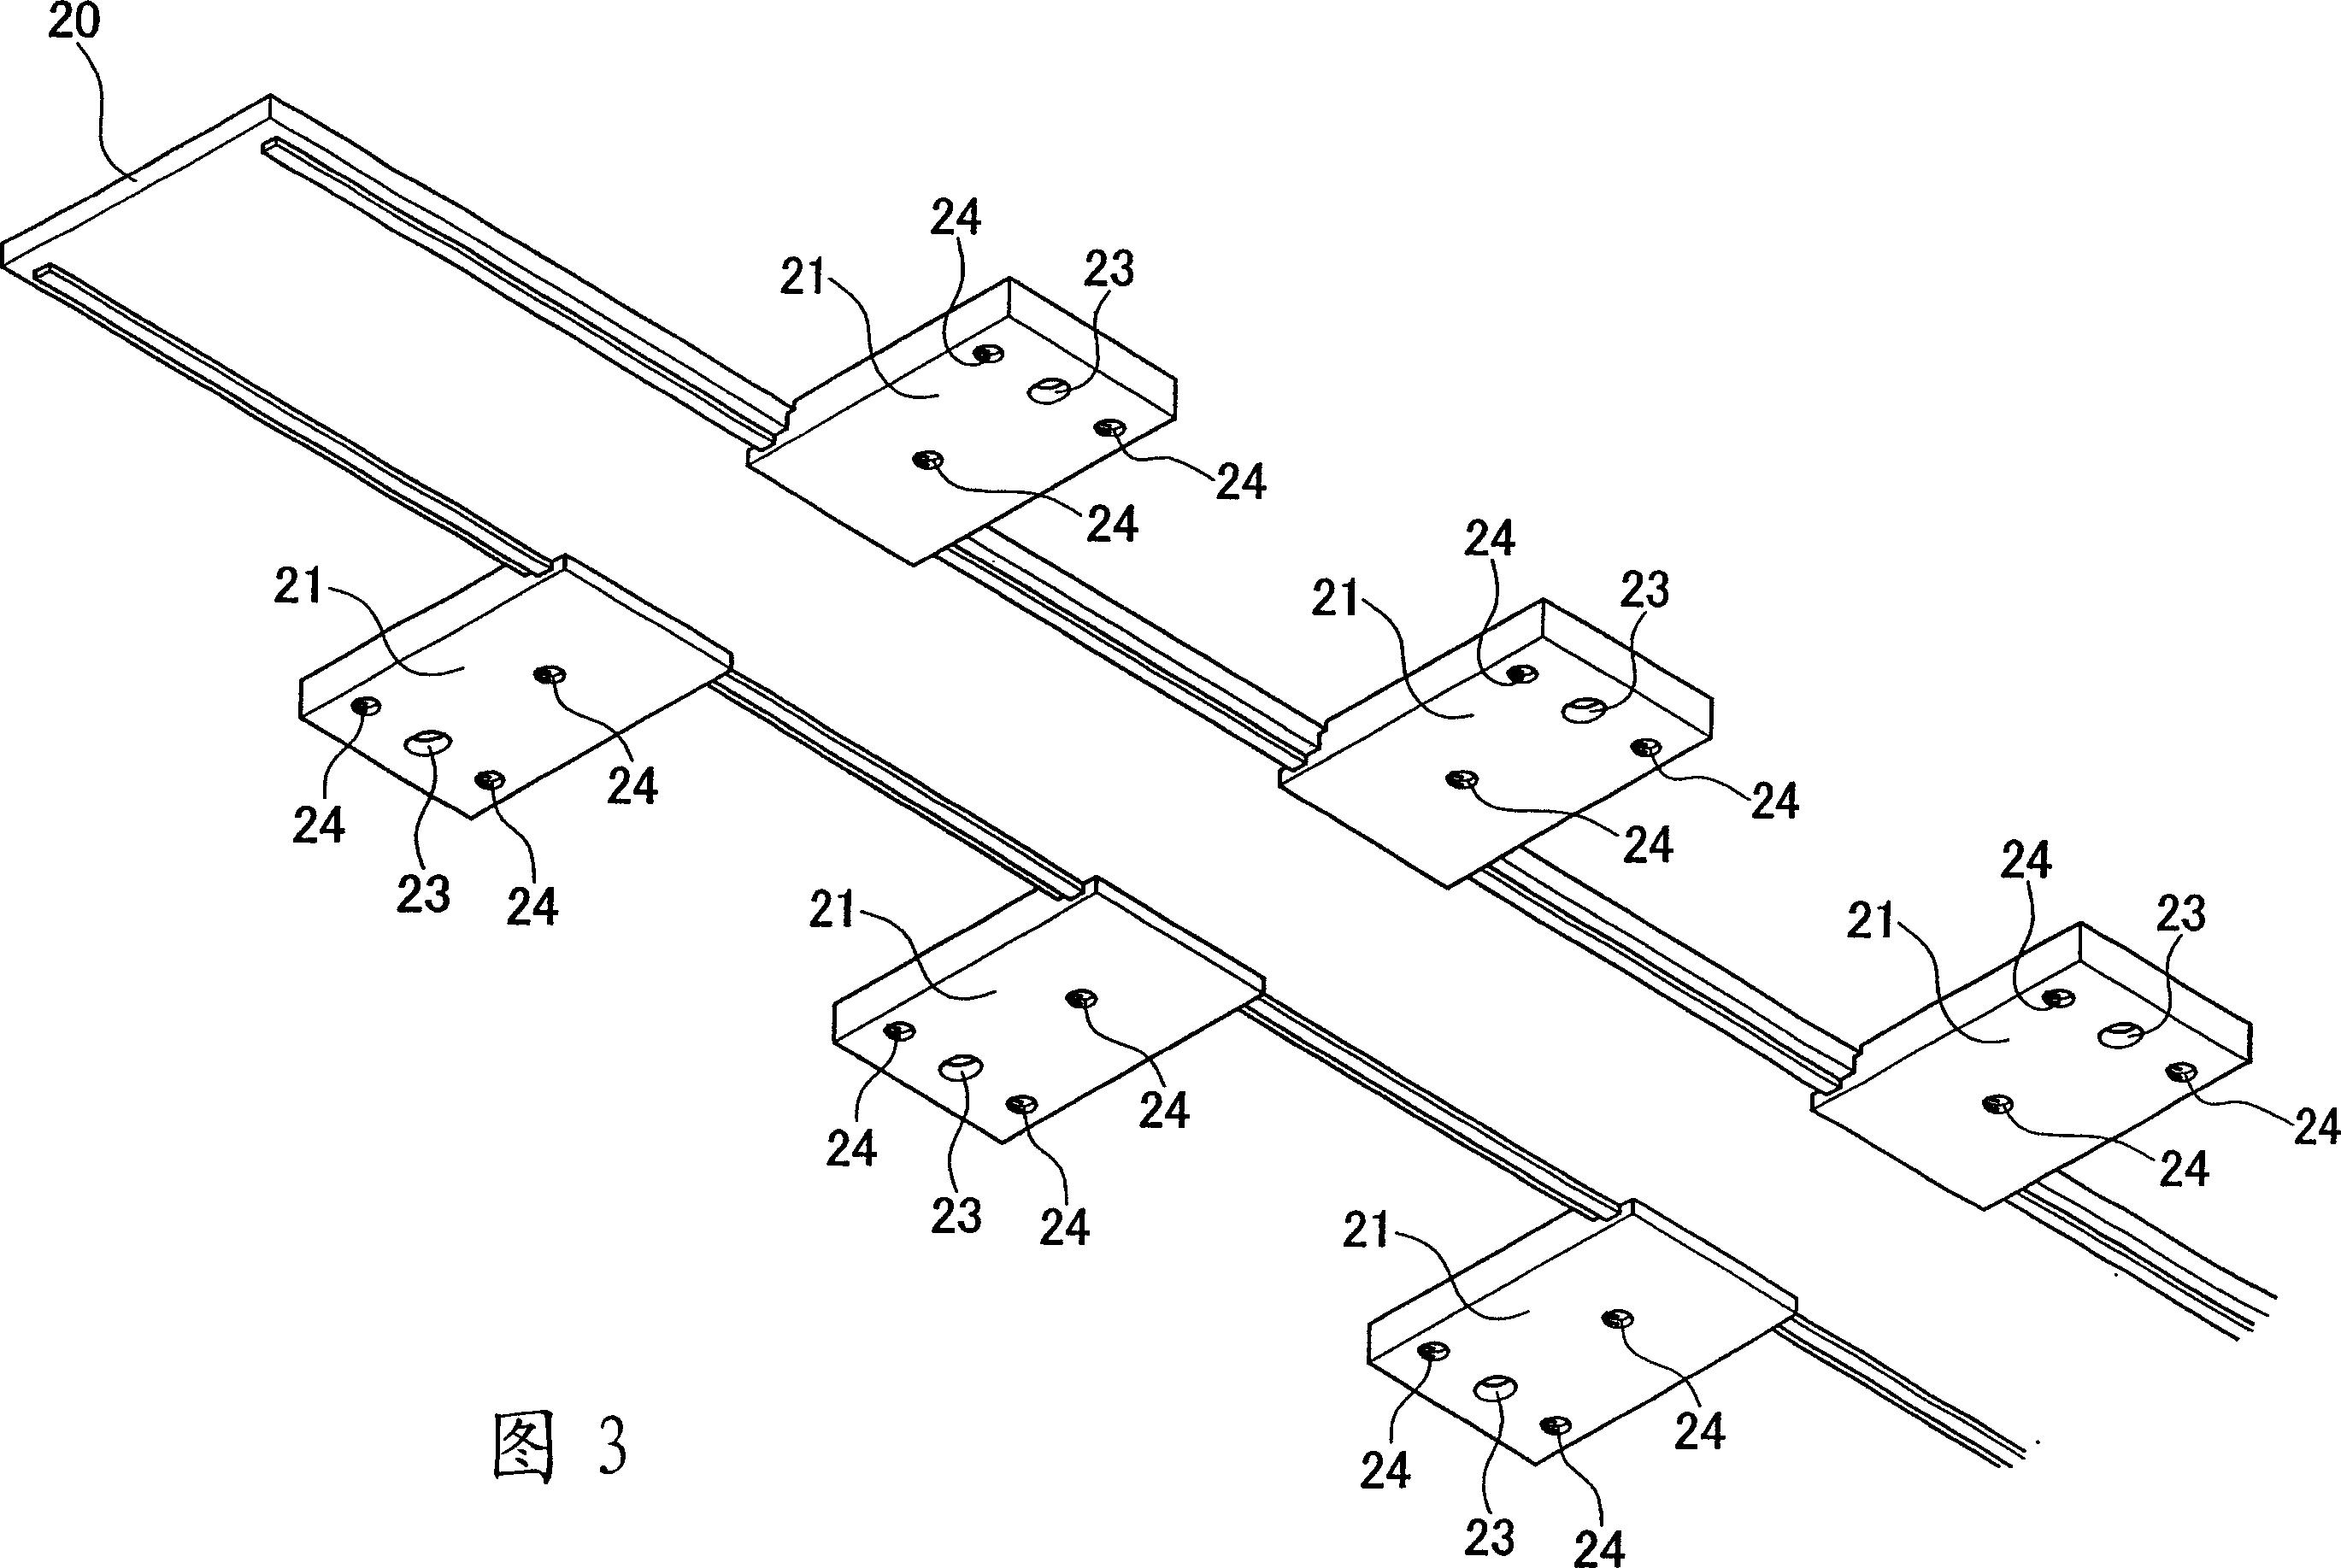 Substrate checking device